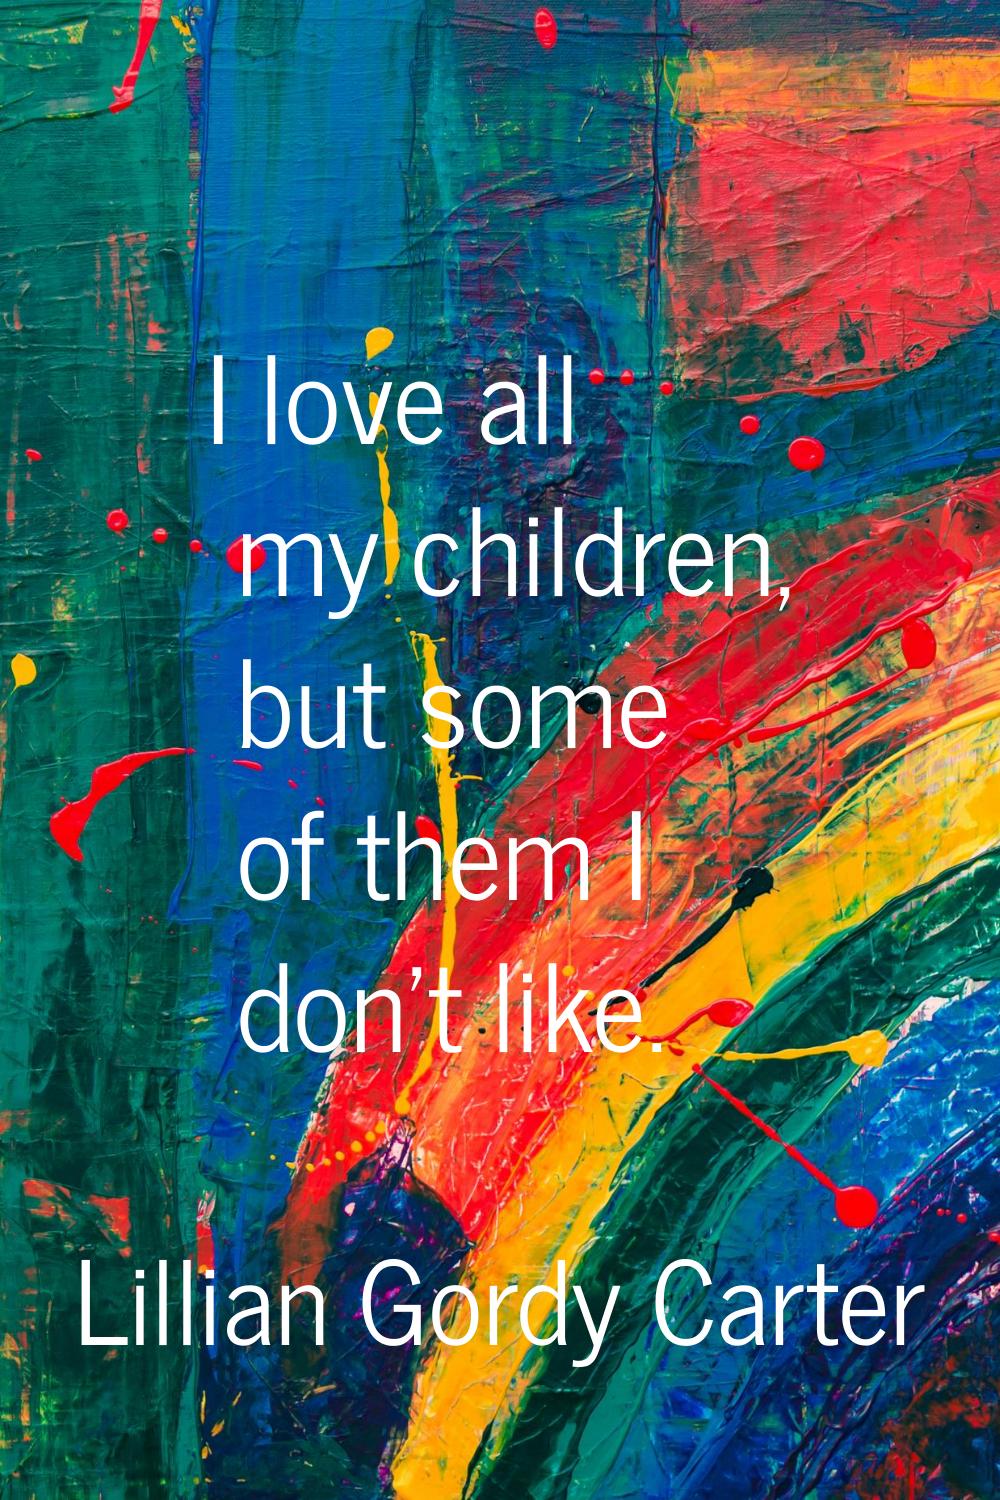 I love all my children, but some of them I don't like.